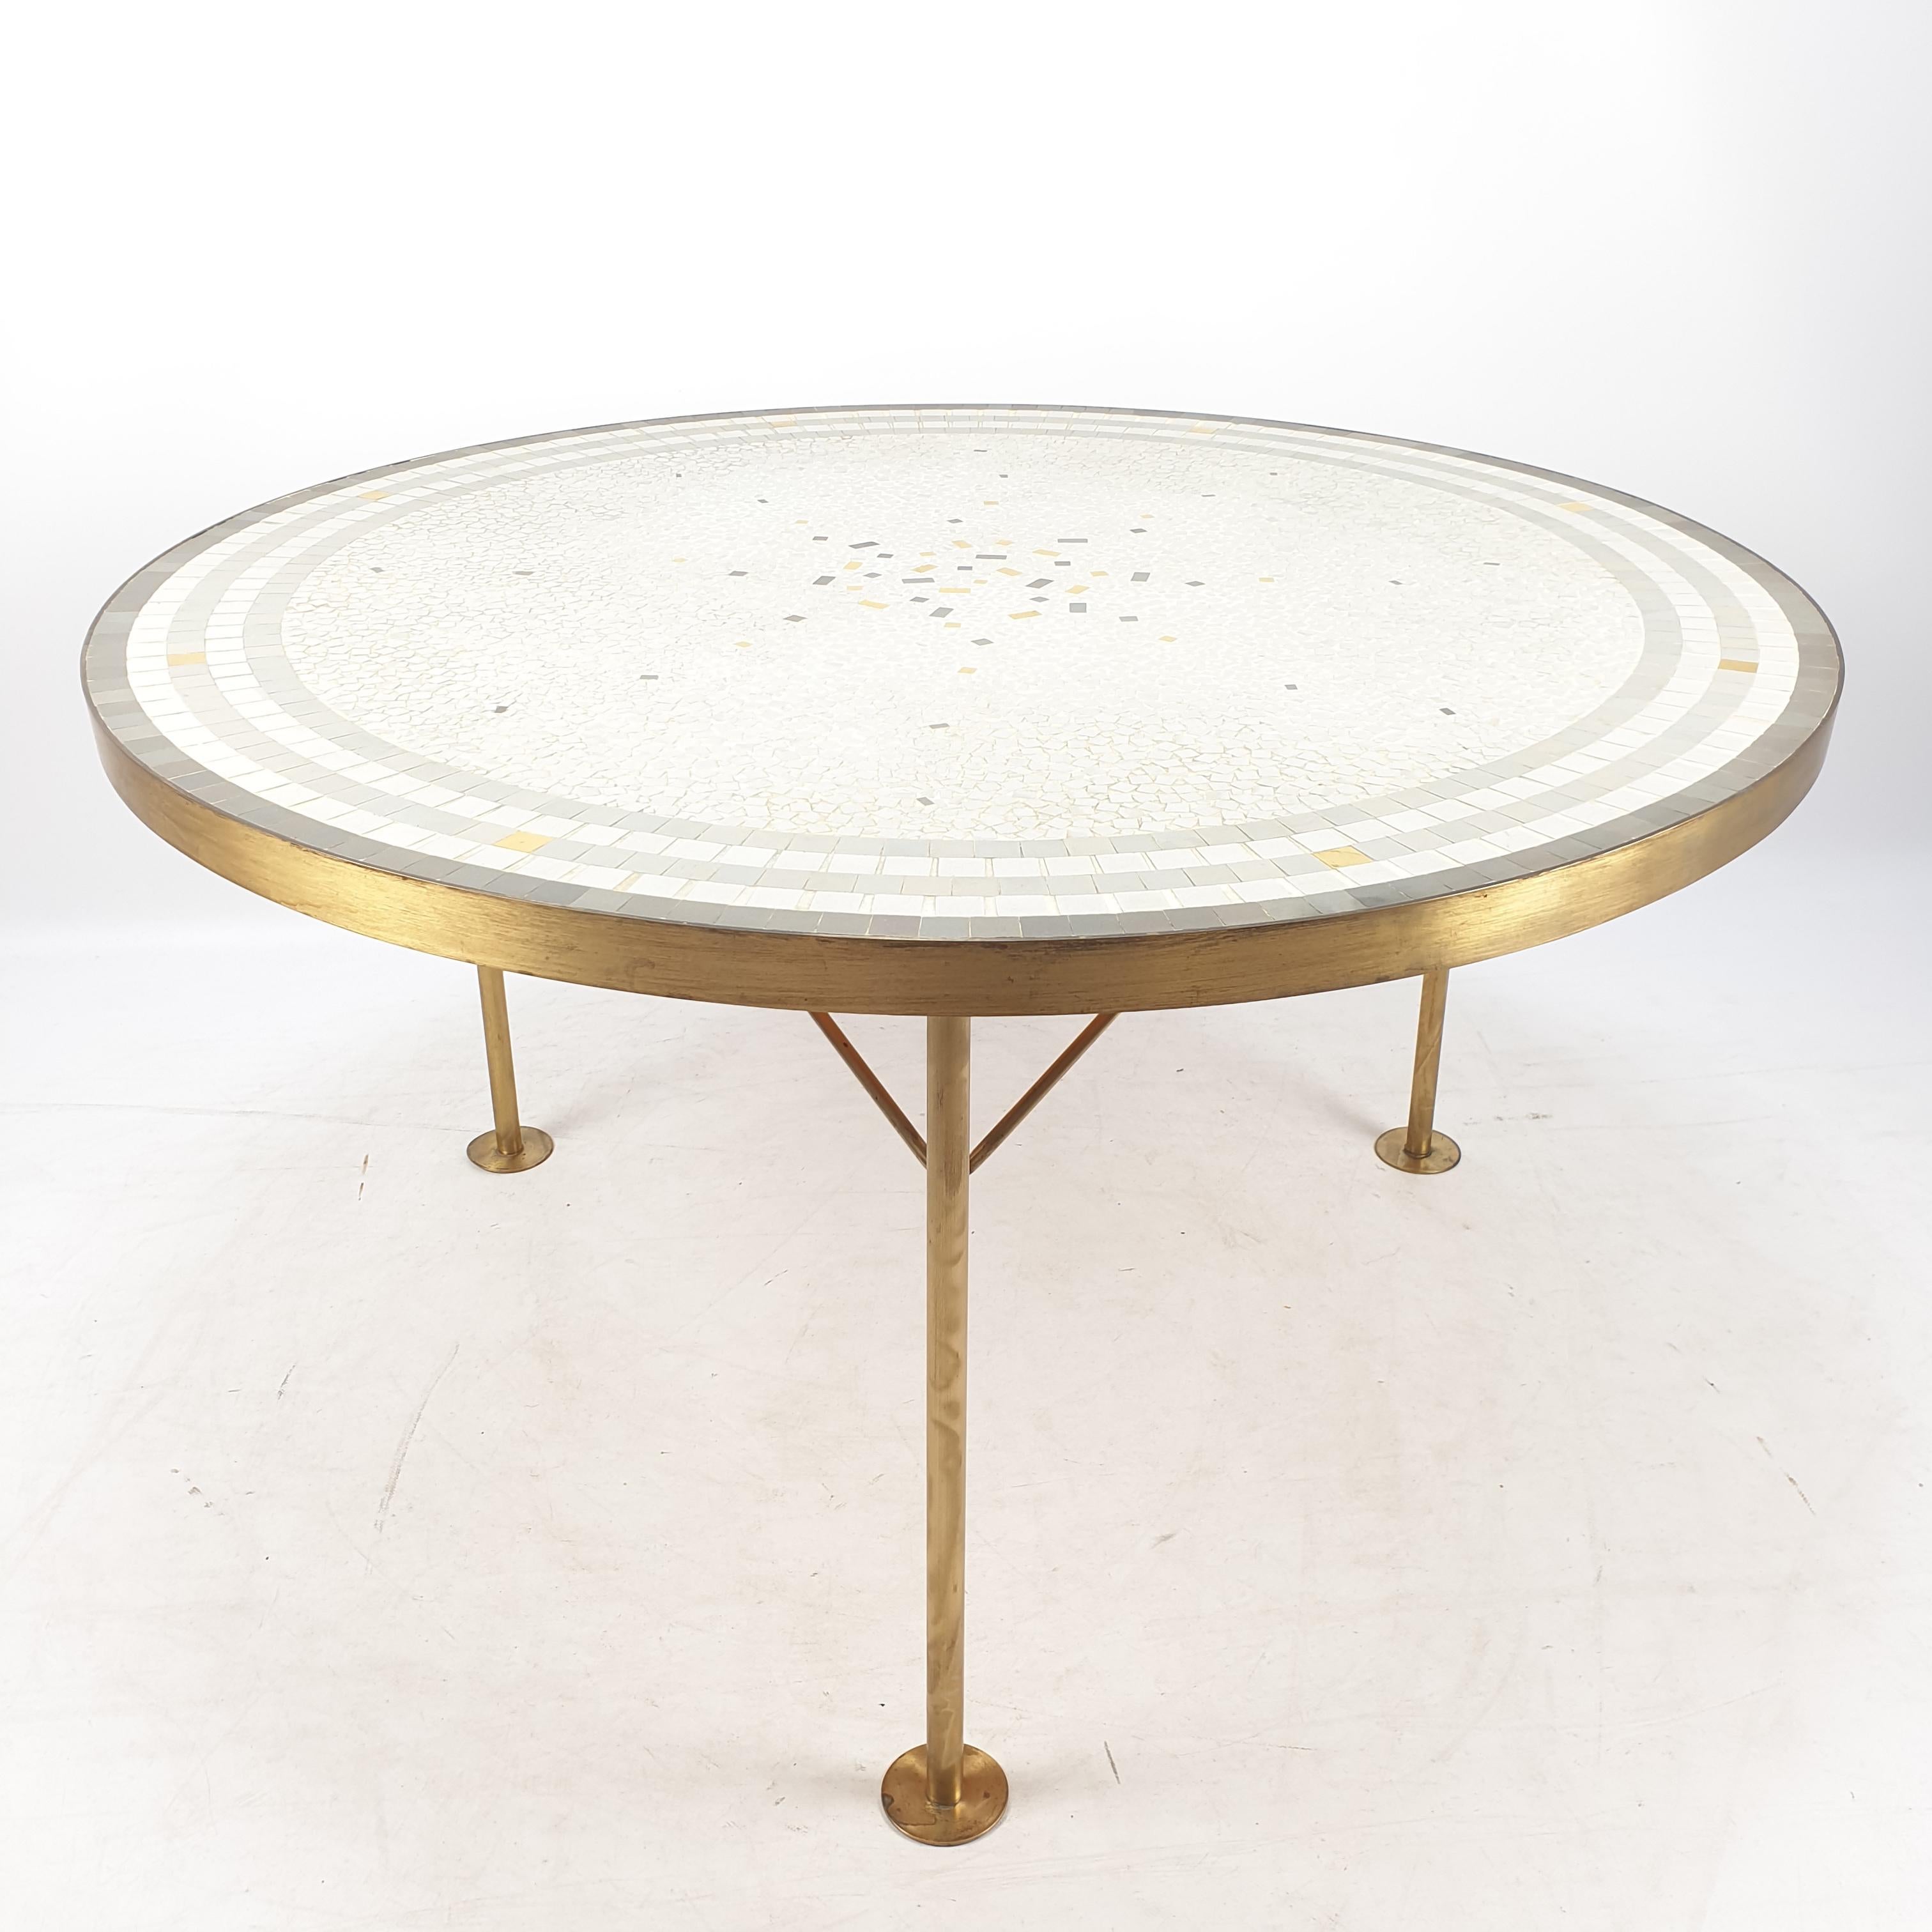 Beautiful round Mosaic top coffee table by Berthold Muller. Brass band around it on three legs. The top has a beautiful composition and the brass has a lovely patina. Berthold Muller-Oerlinghausen (1893-1979) was a German sculptor who specialized in